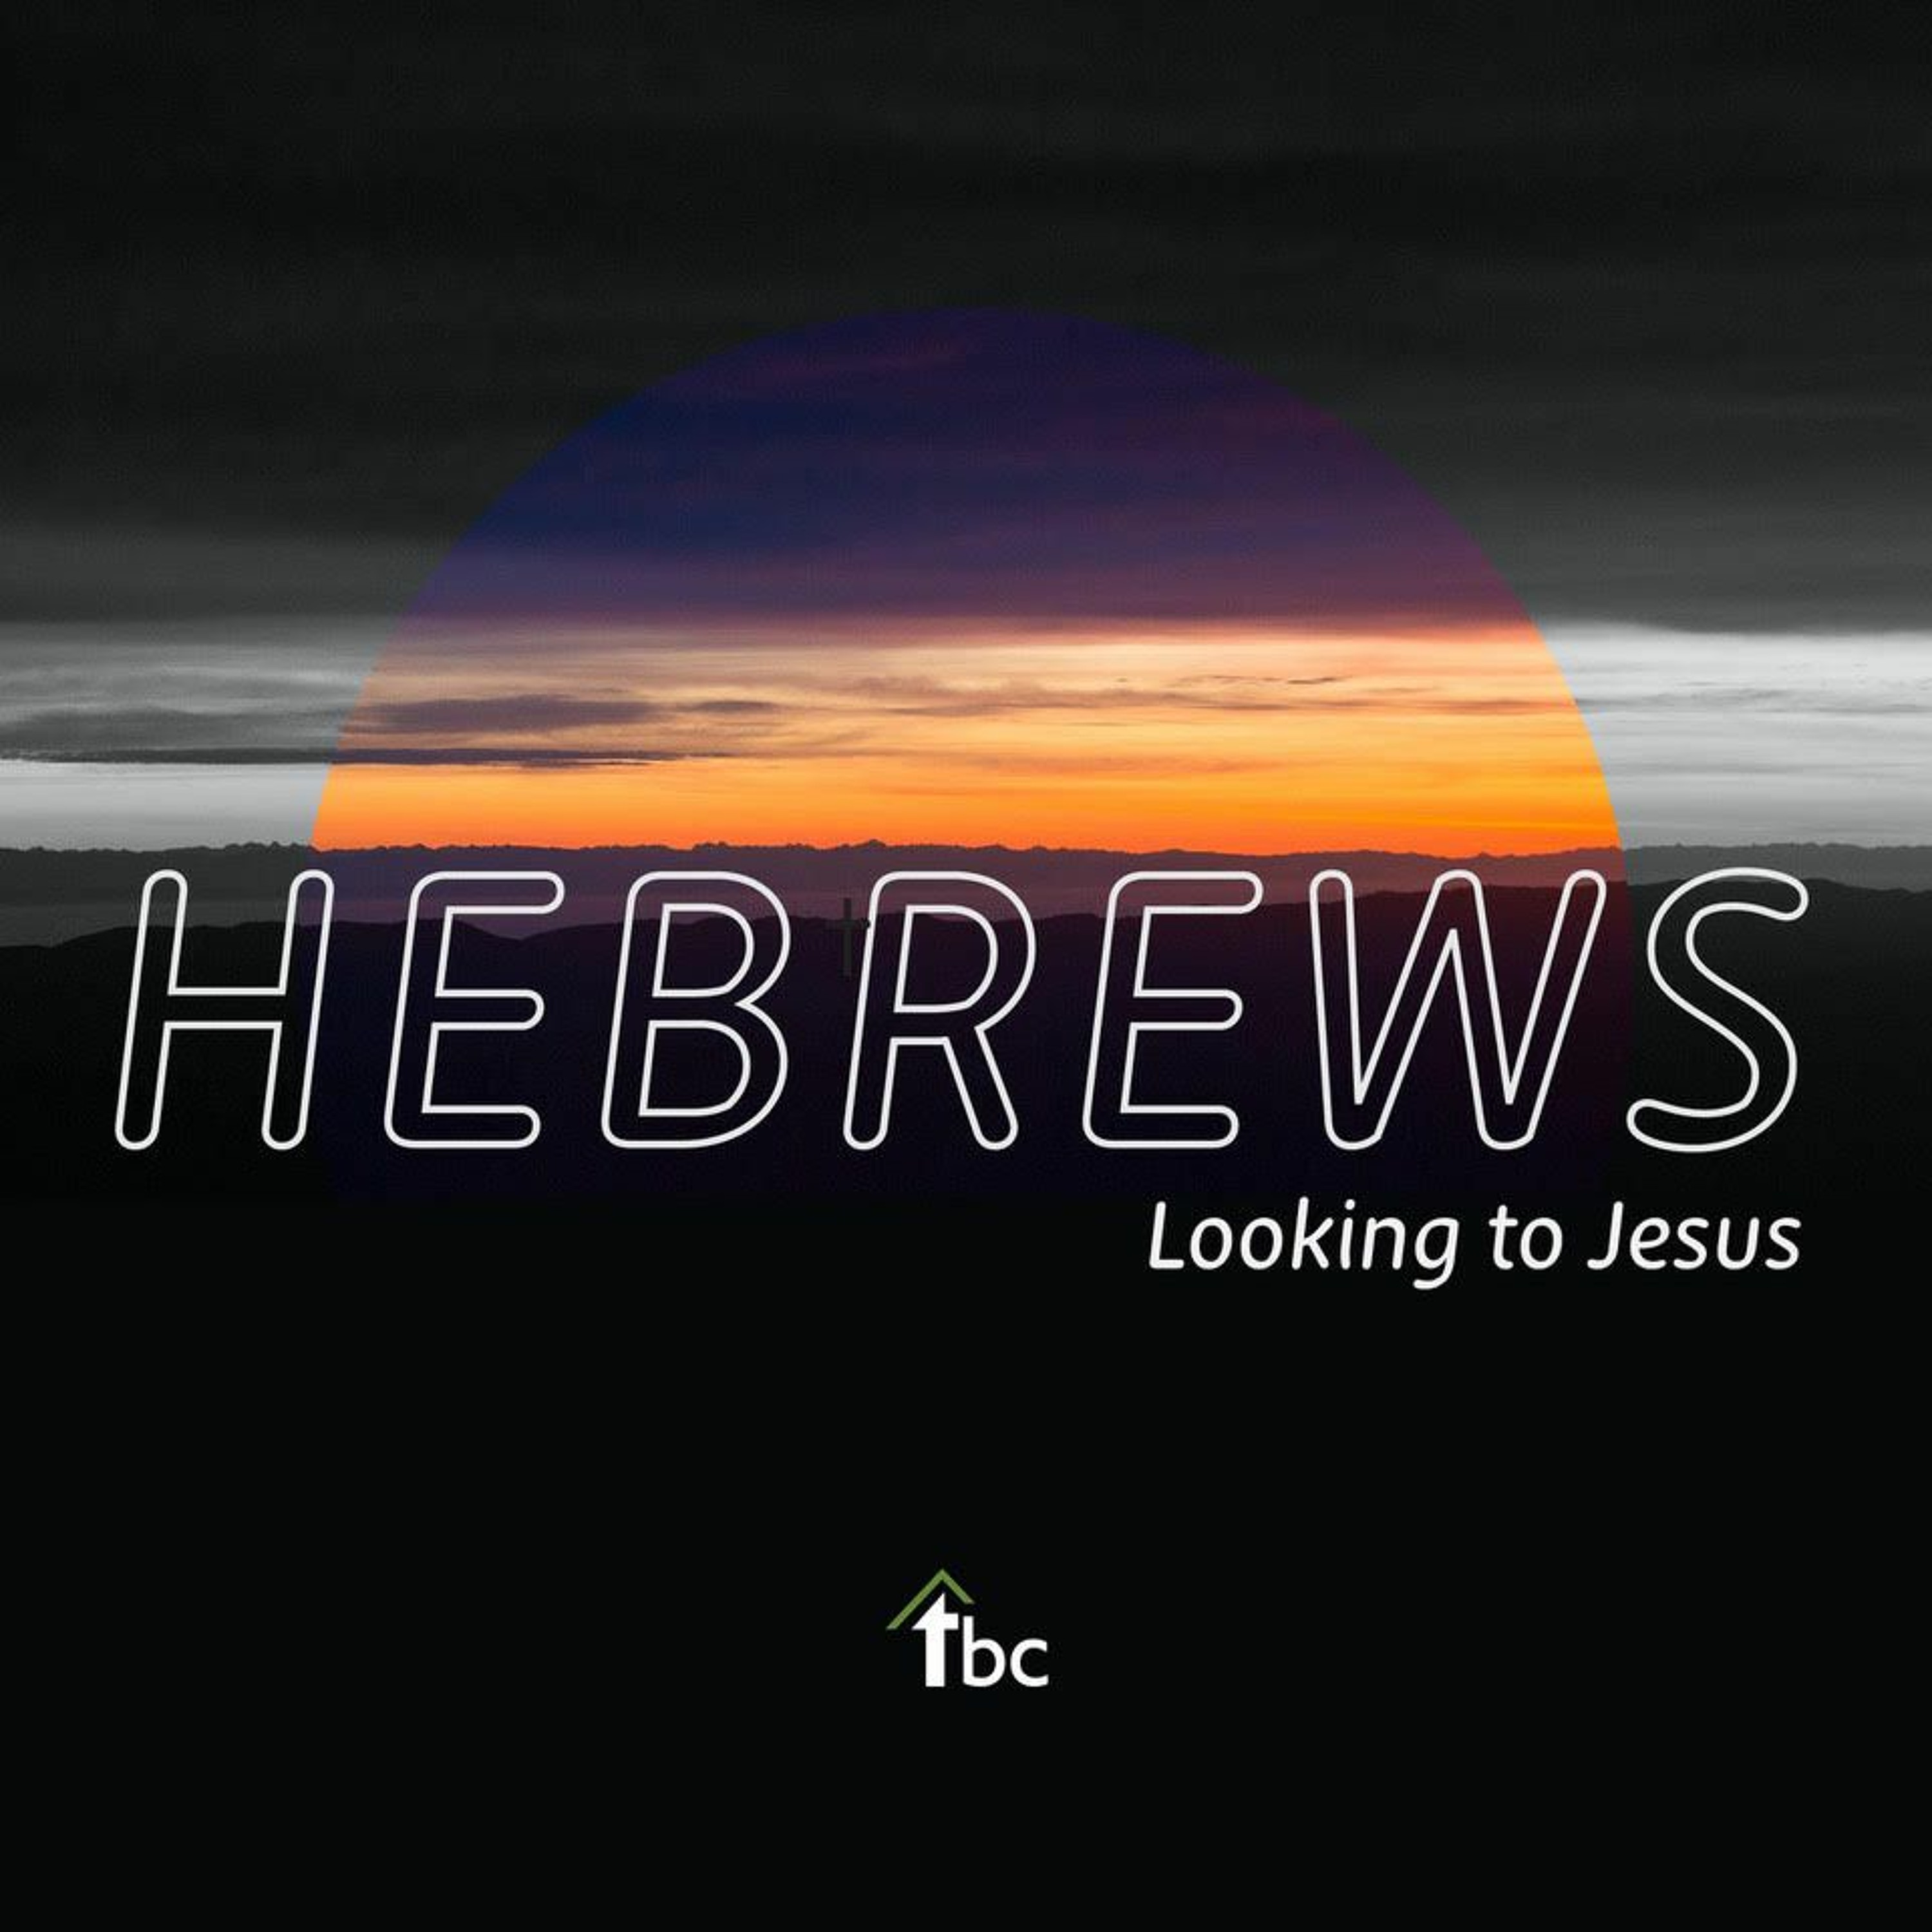 The Second Coming of Jesus (Hebrews 9:27-28)